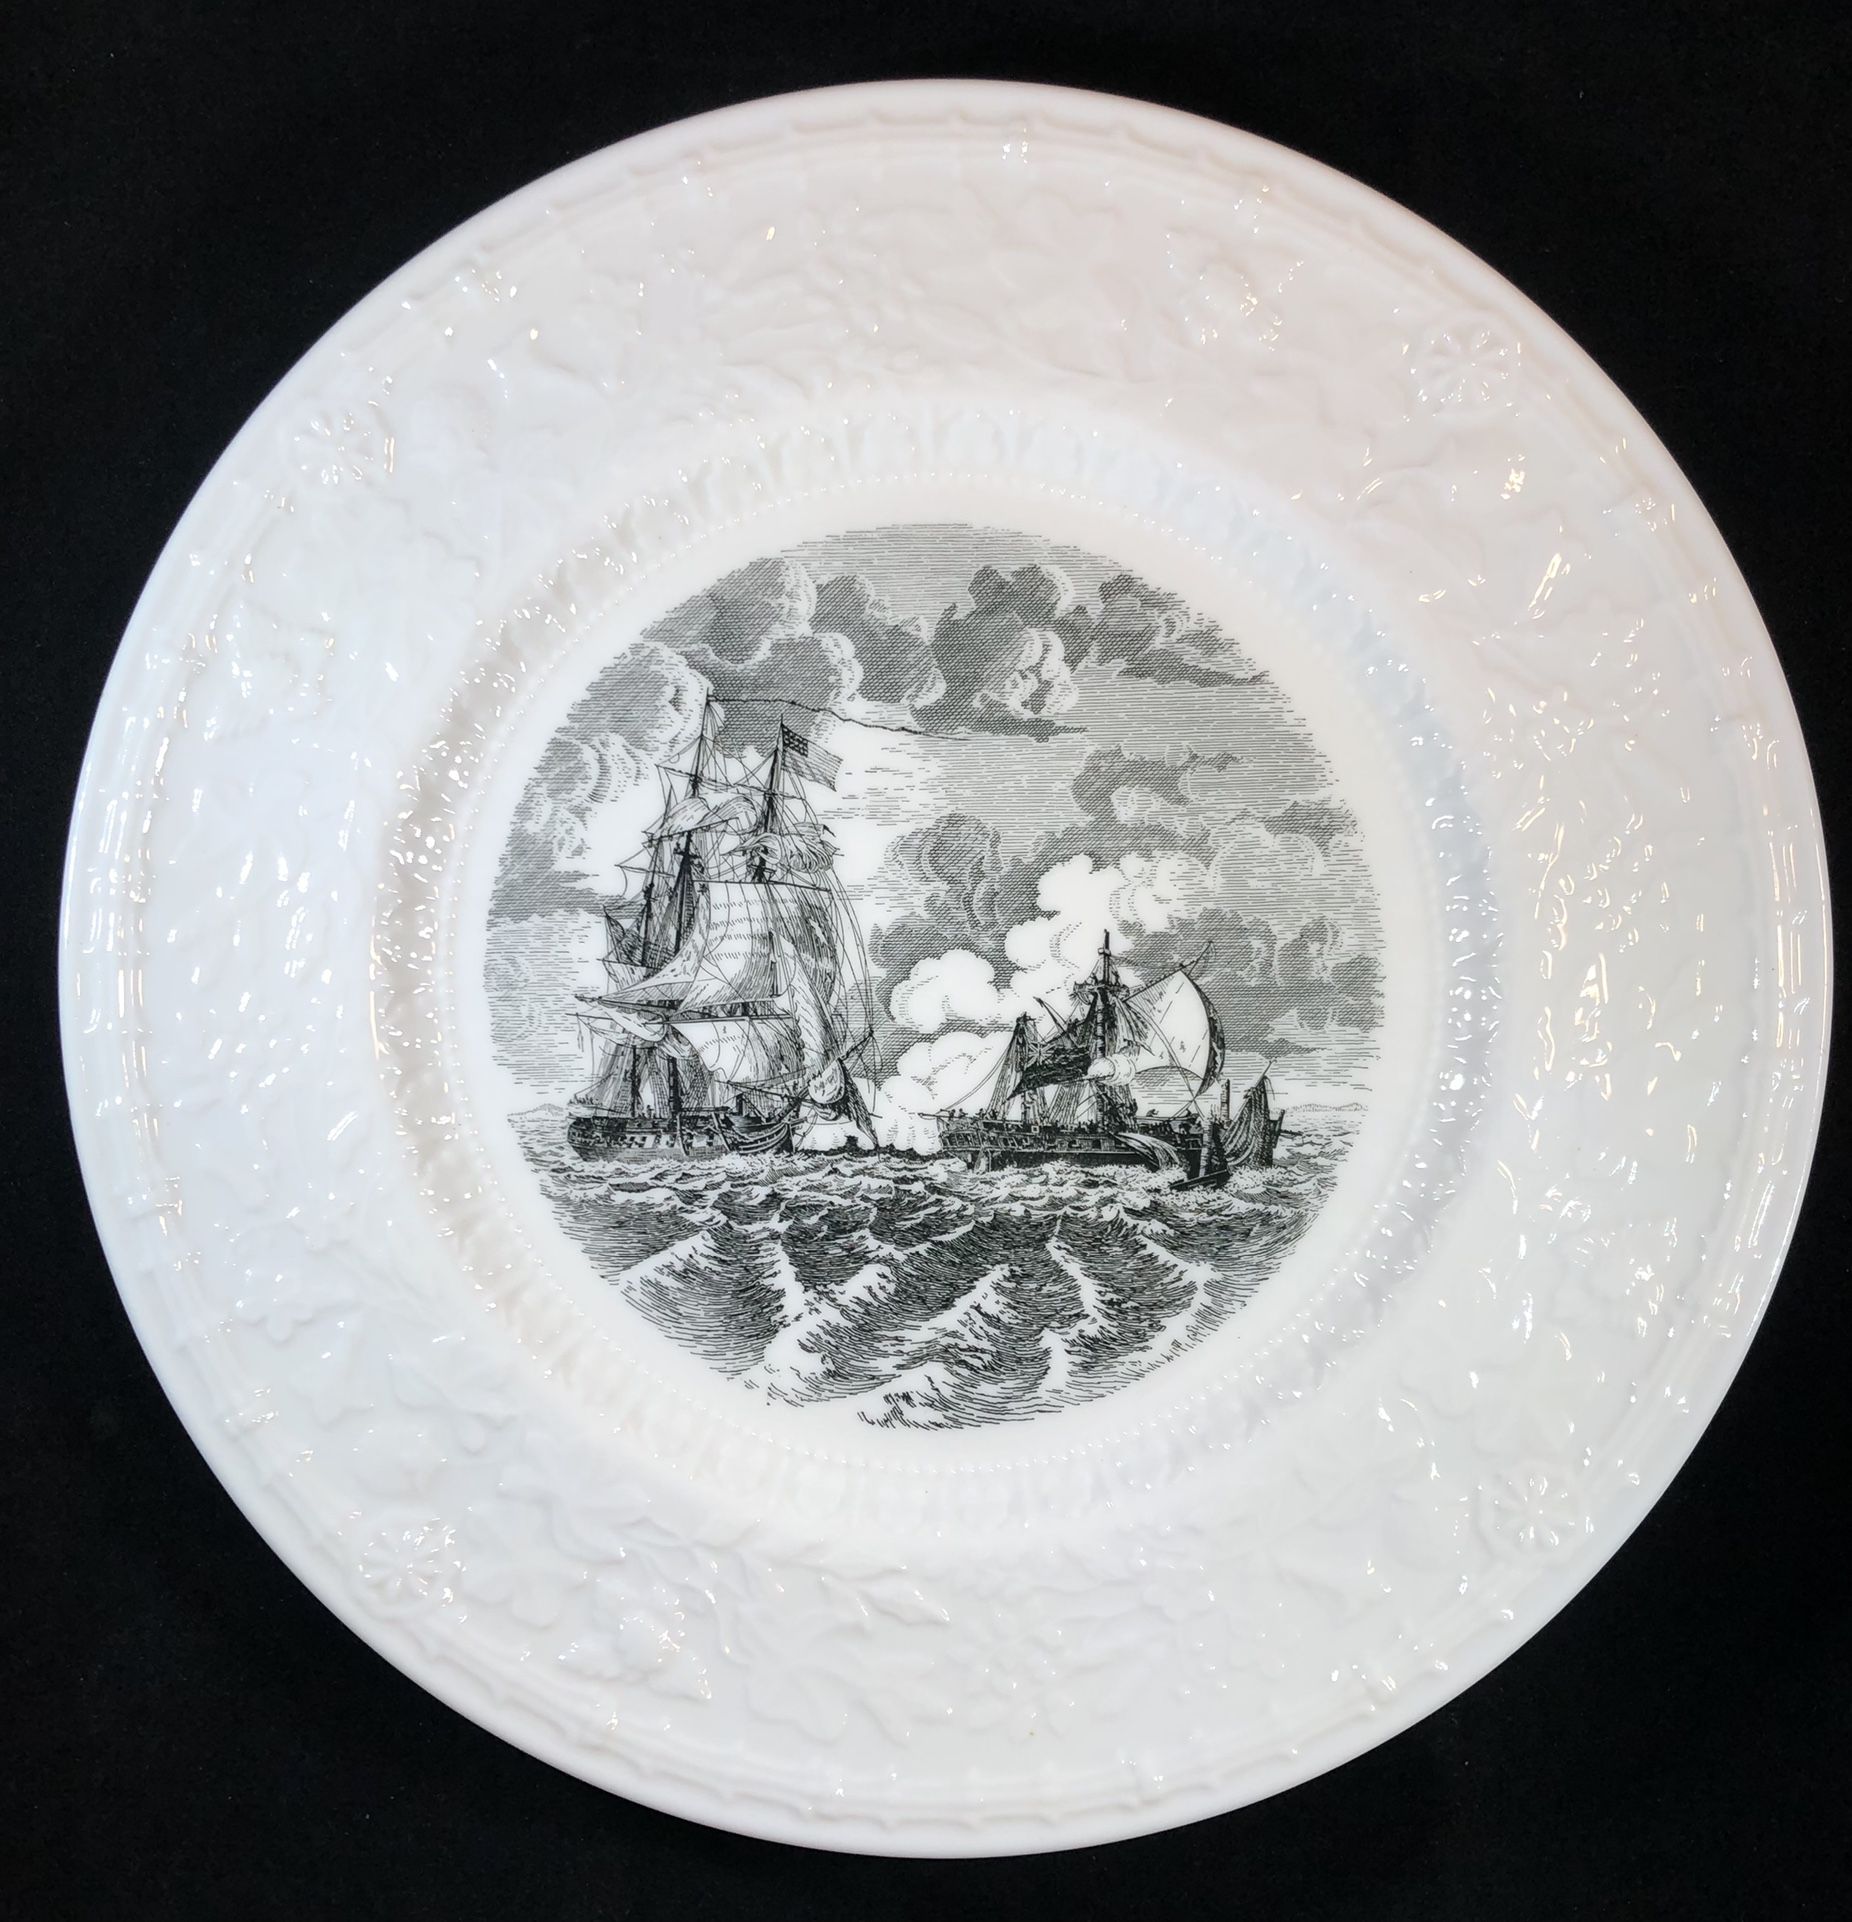 Shenango Naval Plate Series #9 The Constitution and the Java, Black and White Plate